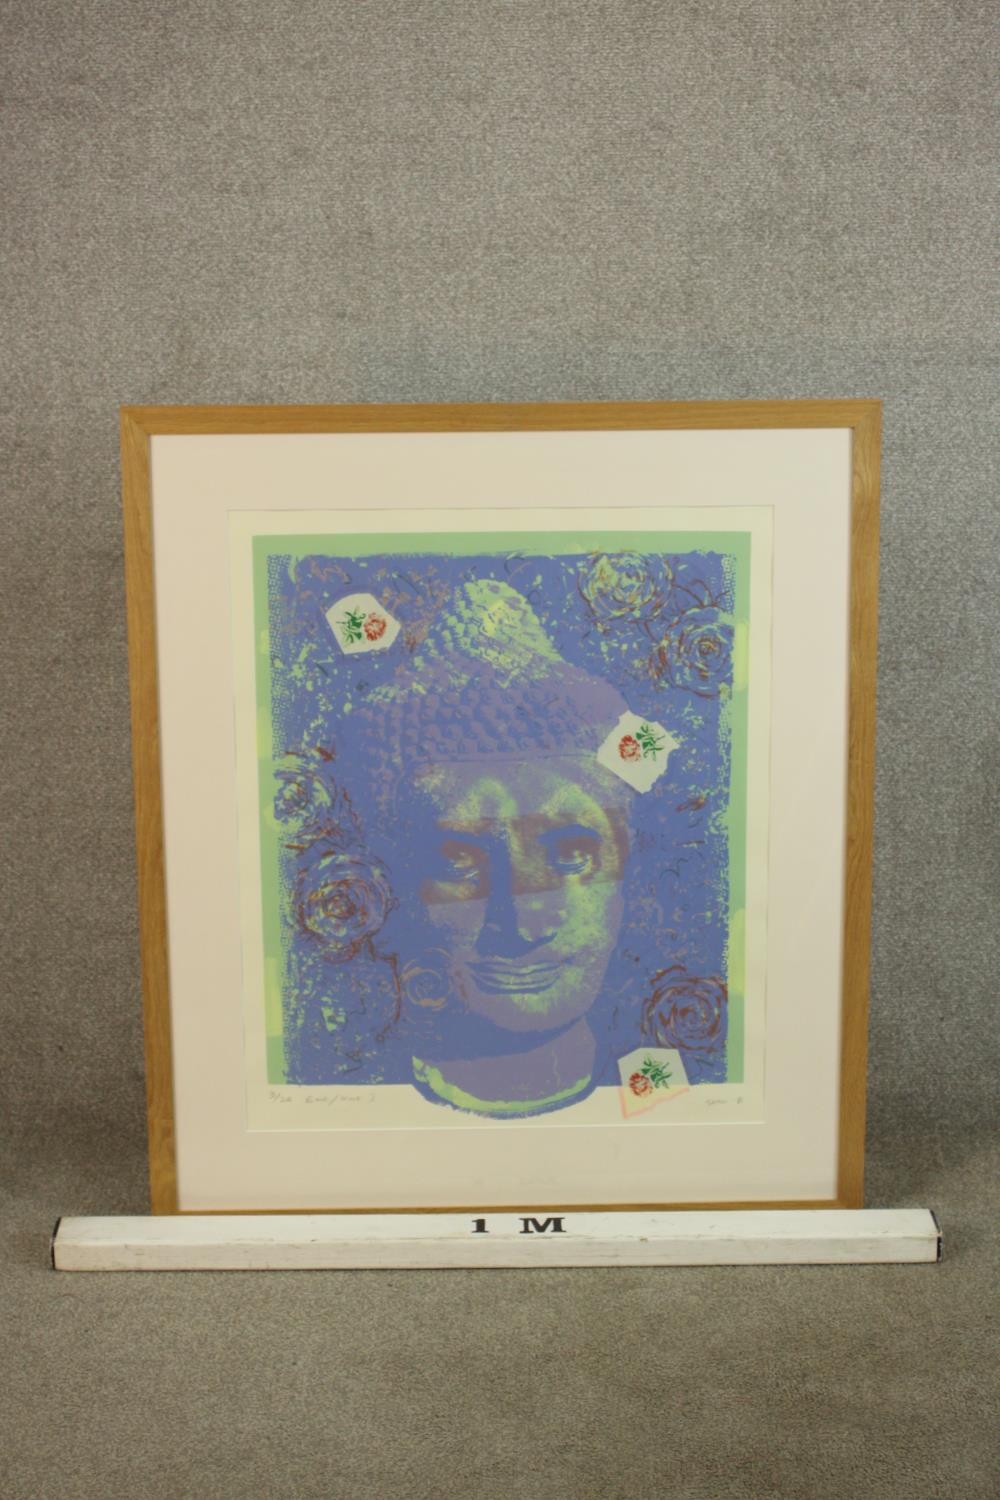 David Shaw (20th century), East/West, an original limited edition linocut 3/28, signed and framed. - Image 3 of 7